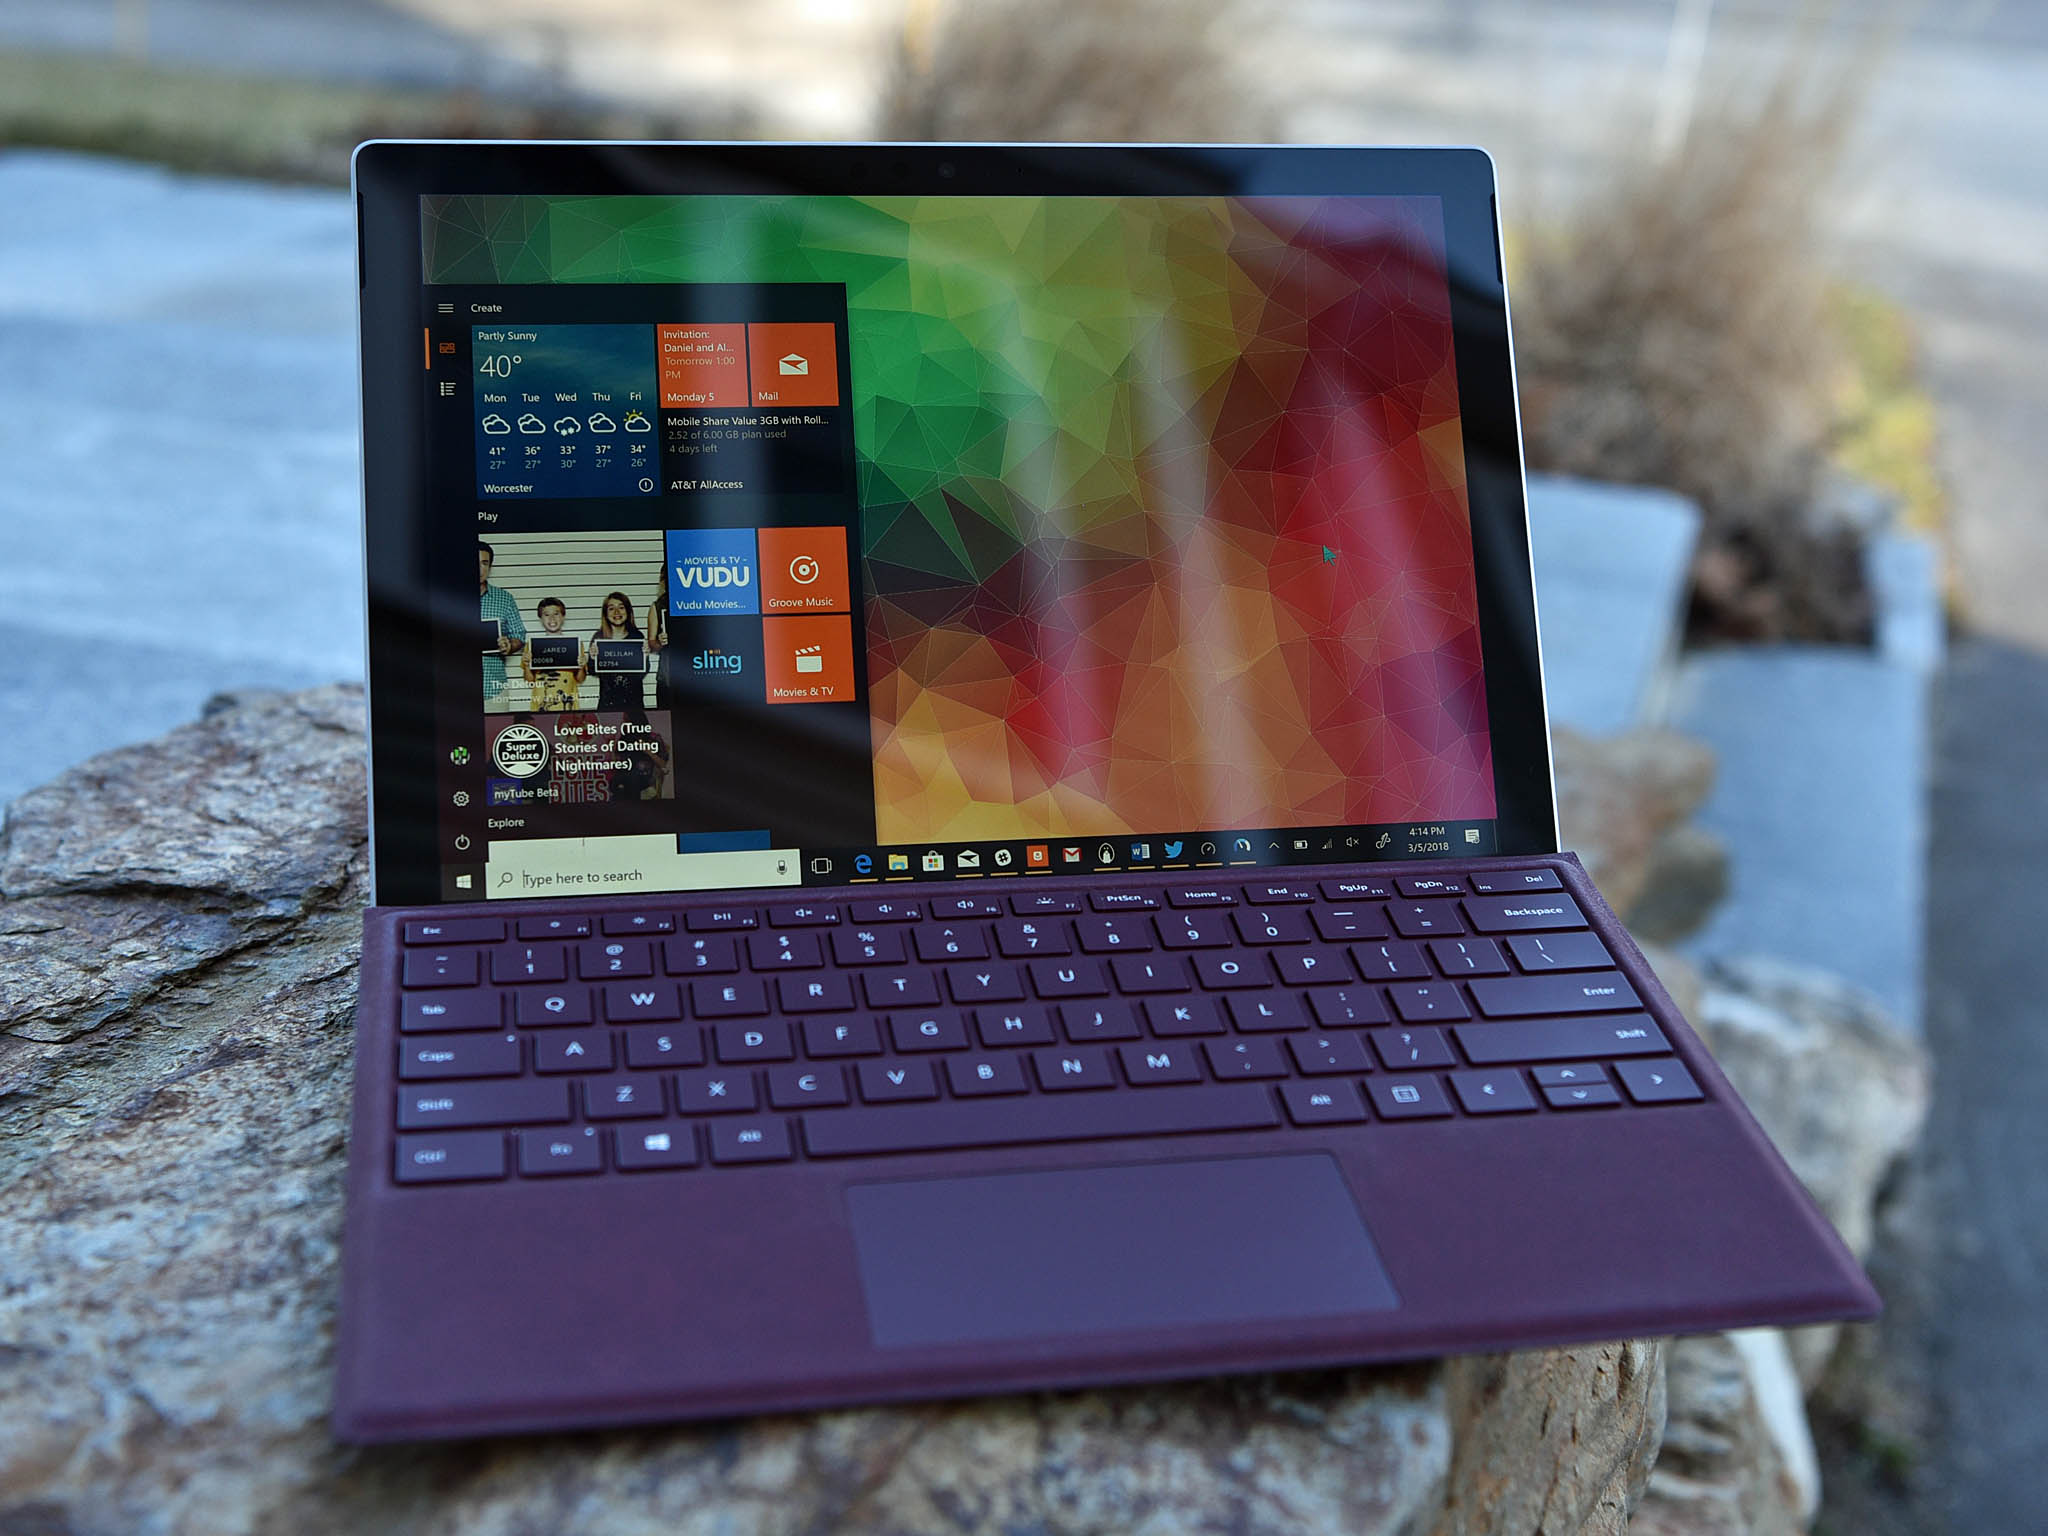 Chime in: Does the Surface Pro need a better camera?